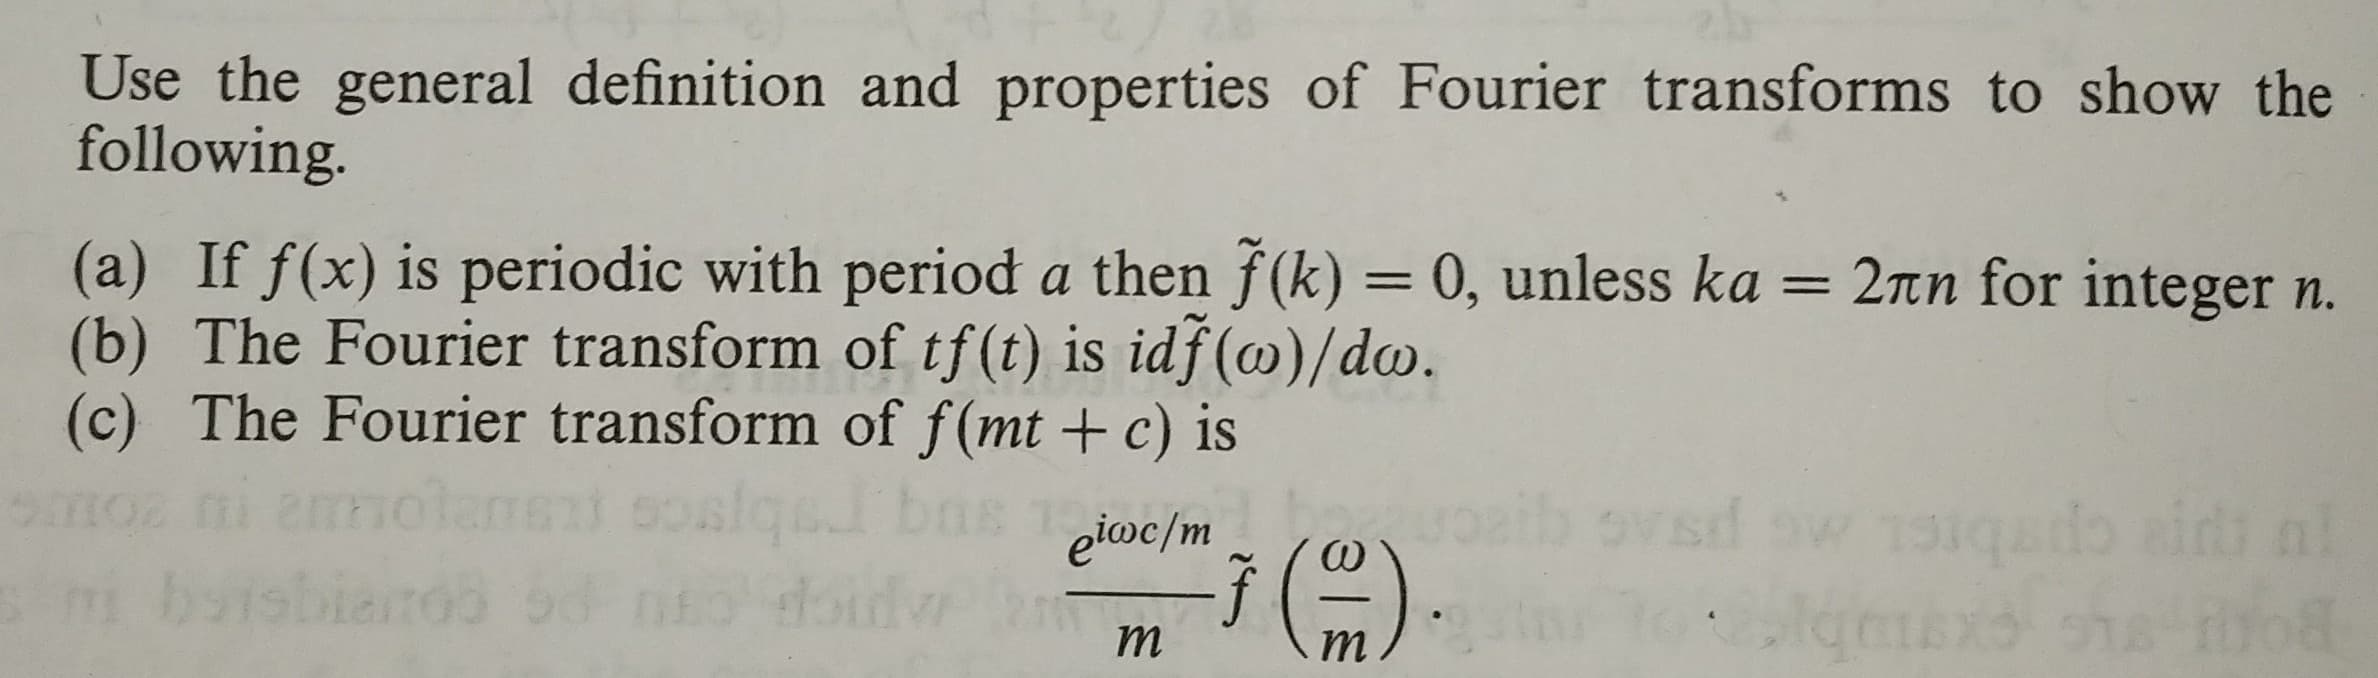 Use the general definition and properties of Fourier transforms to show the
following
(a) If f(x) is periodic with period a then f(k)- 0, unless ka
(b) The Fourier transform of tf(t) is idf(co)/do.
(c) The Fourier transform of f(mt +c) is
2πη for integer n.
